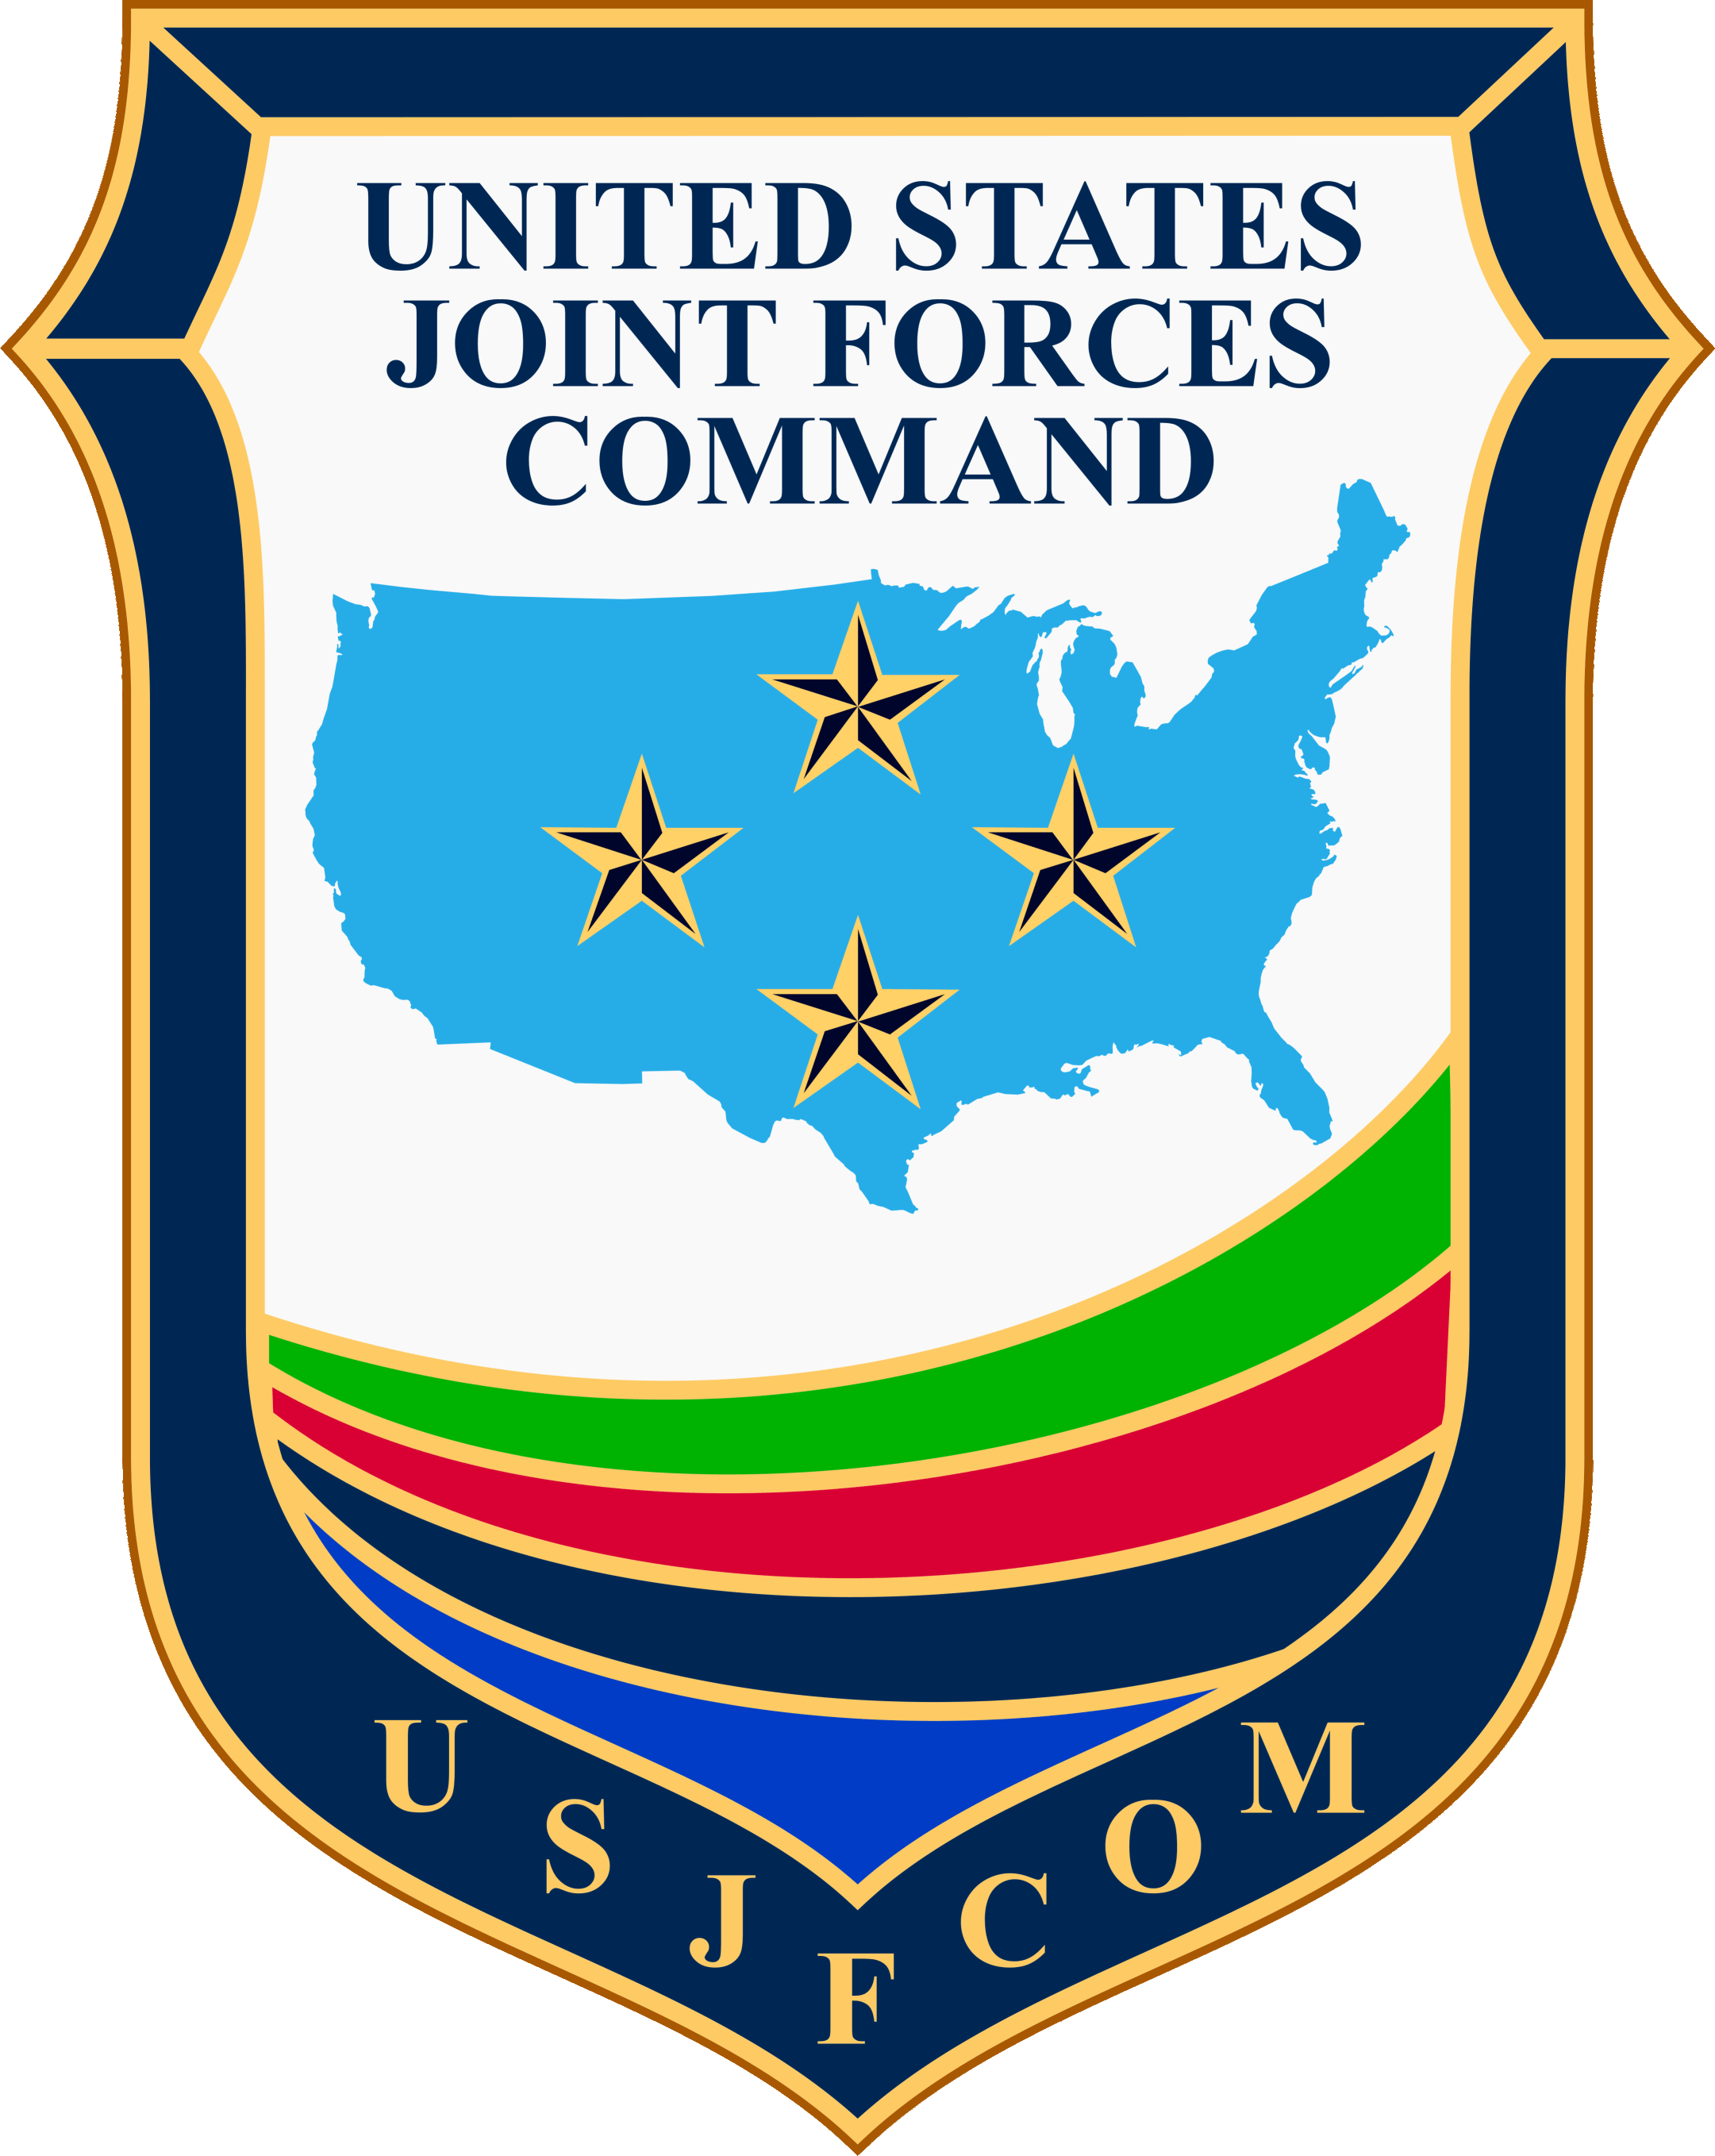 United States Joint Forces Command (USJFCOM)